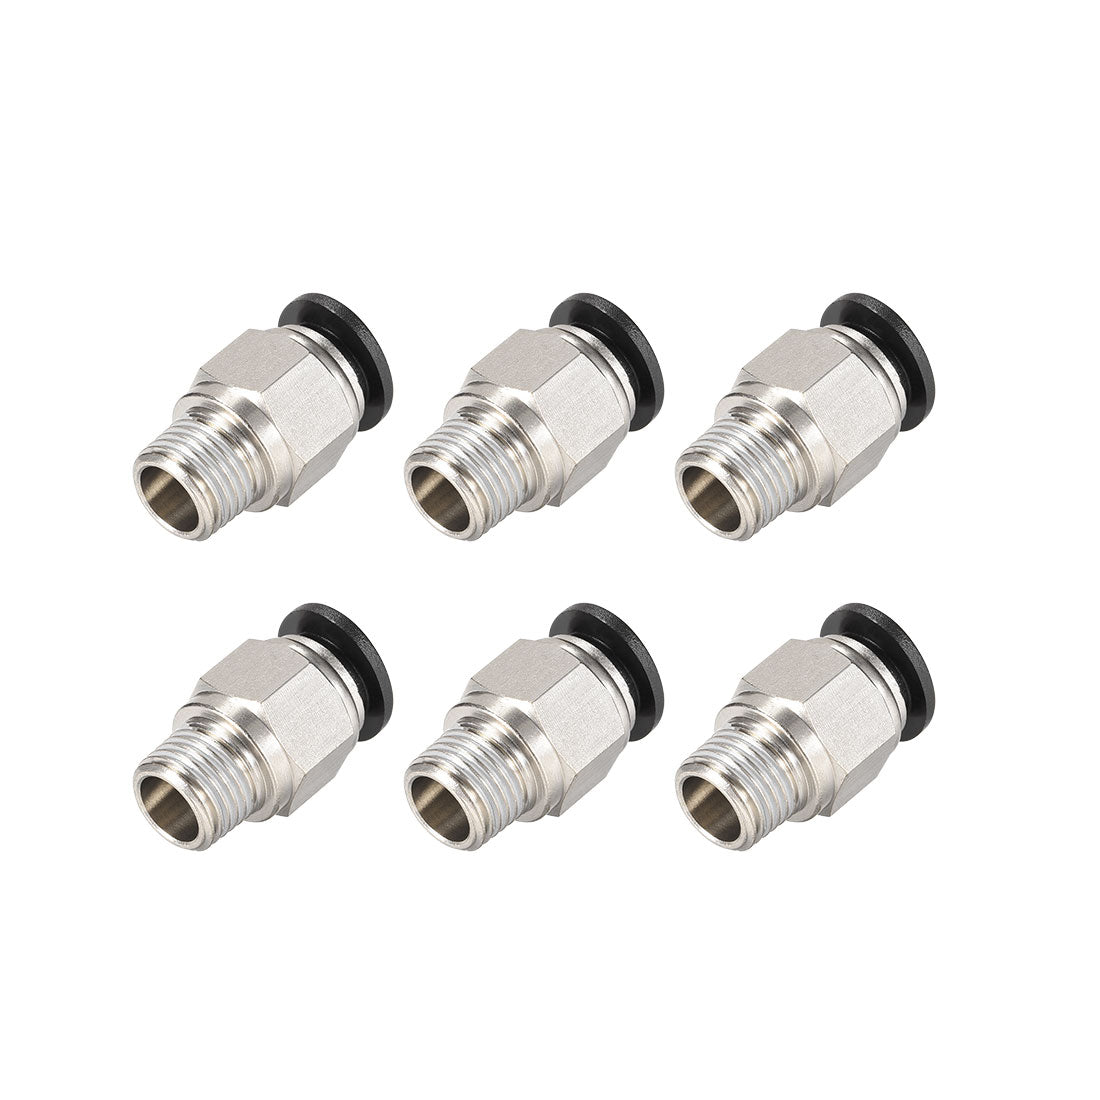 uxcell Uxcell Straight Pneumatic Push to Quick Connect Fittings 1/4NPT Male x 10mm Tube OD Silver Tone 6pcs